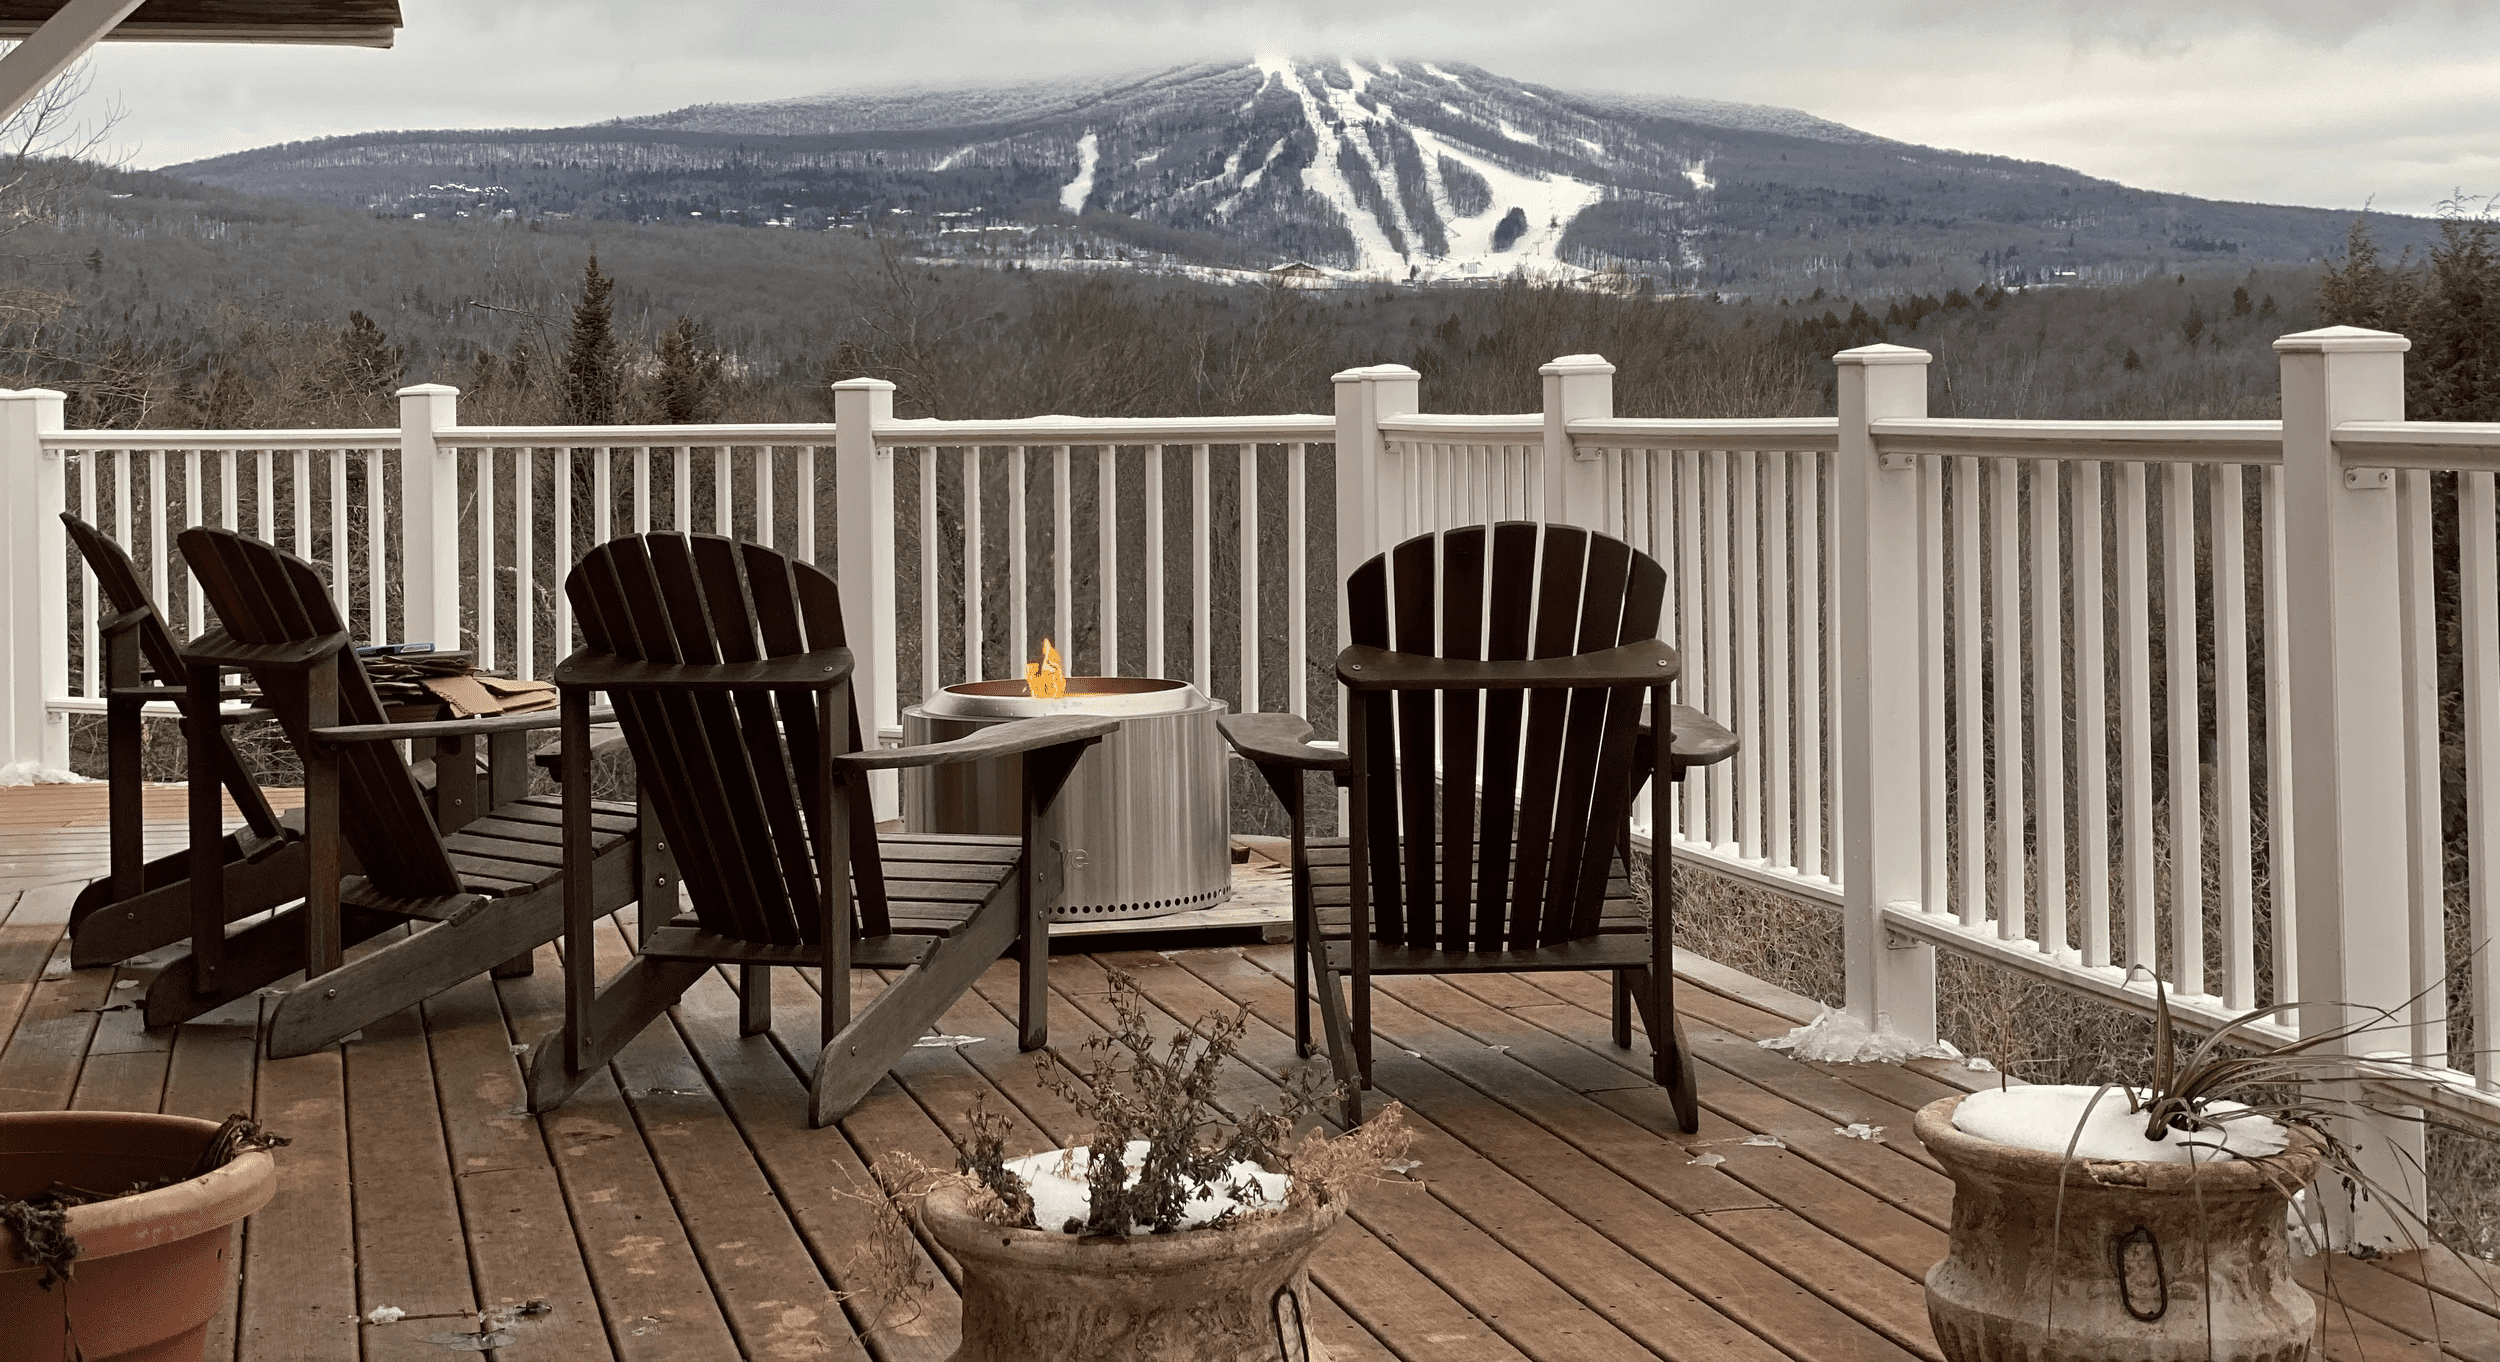 Bromley View Inn - Winter Deck with Mountainview